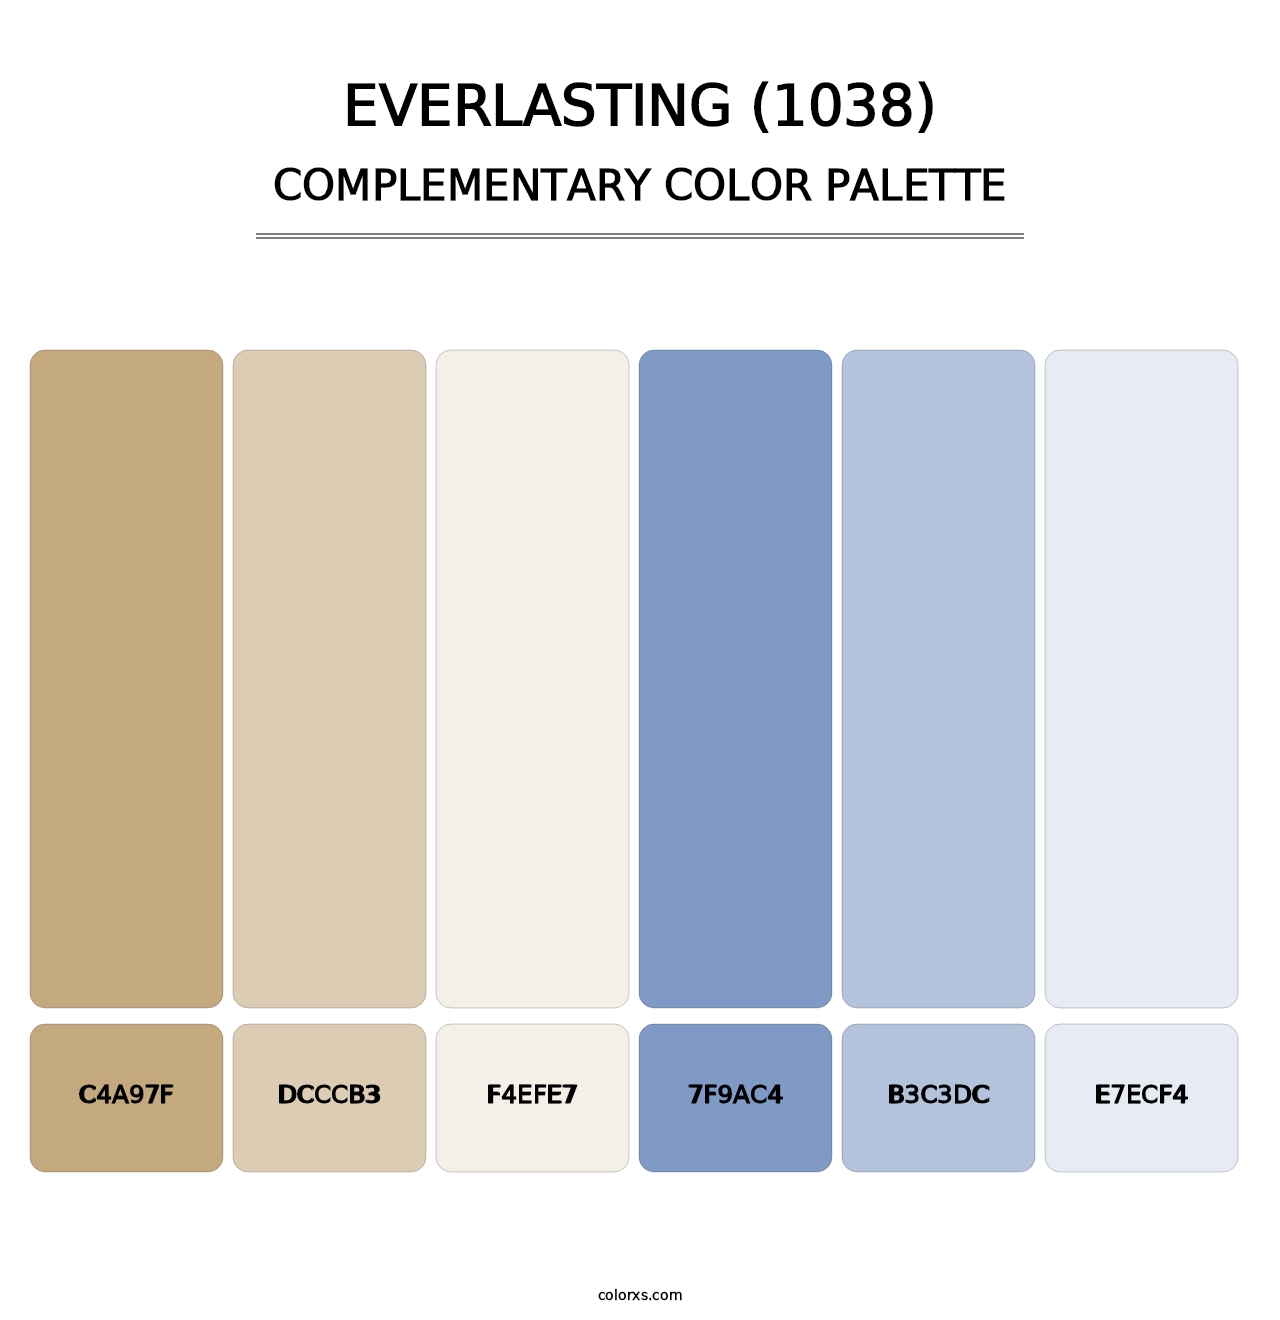 Everlasting (1038) - Complementary Color Palette